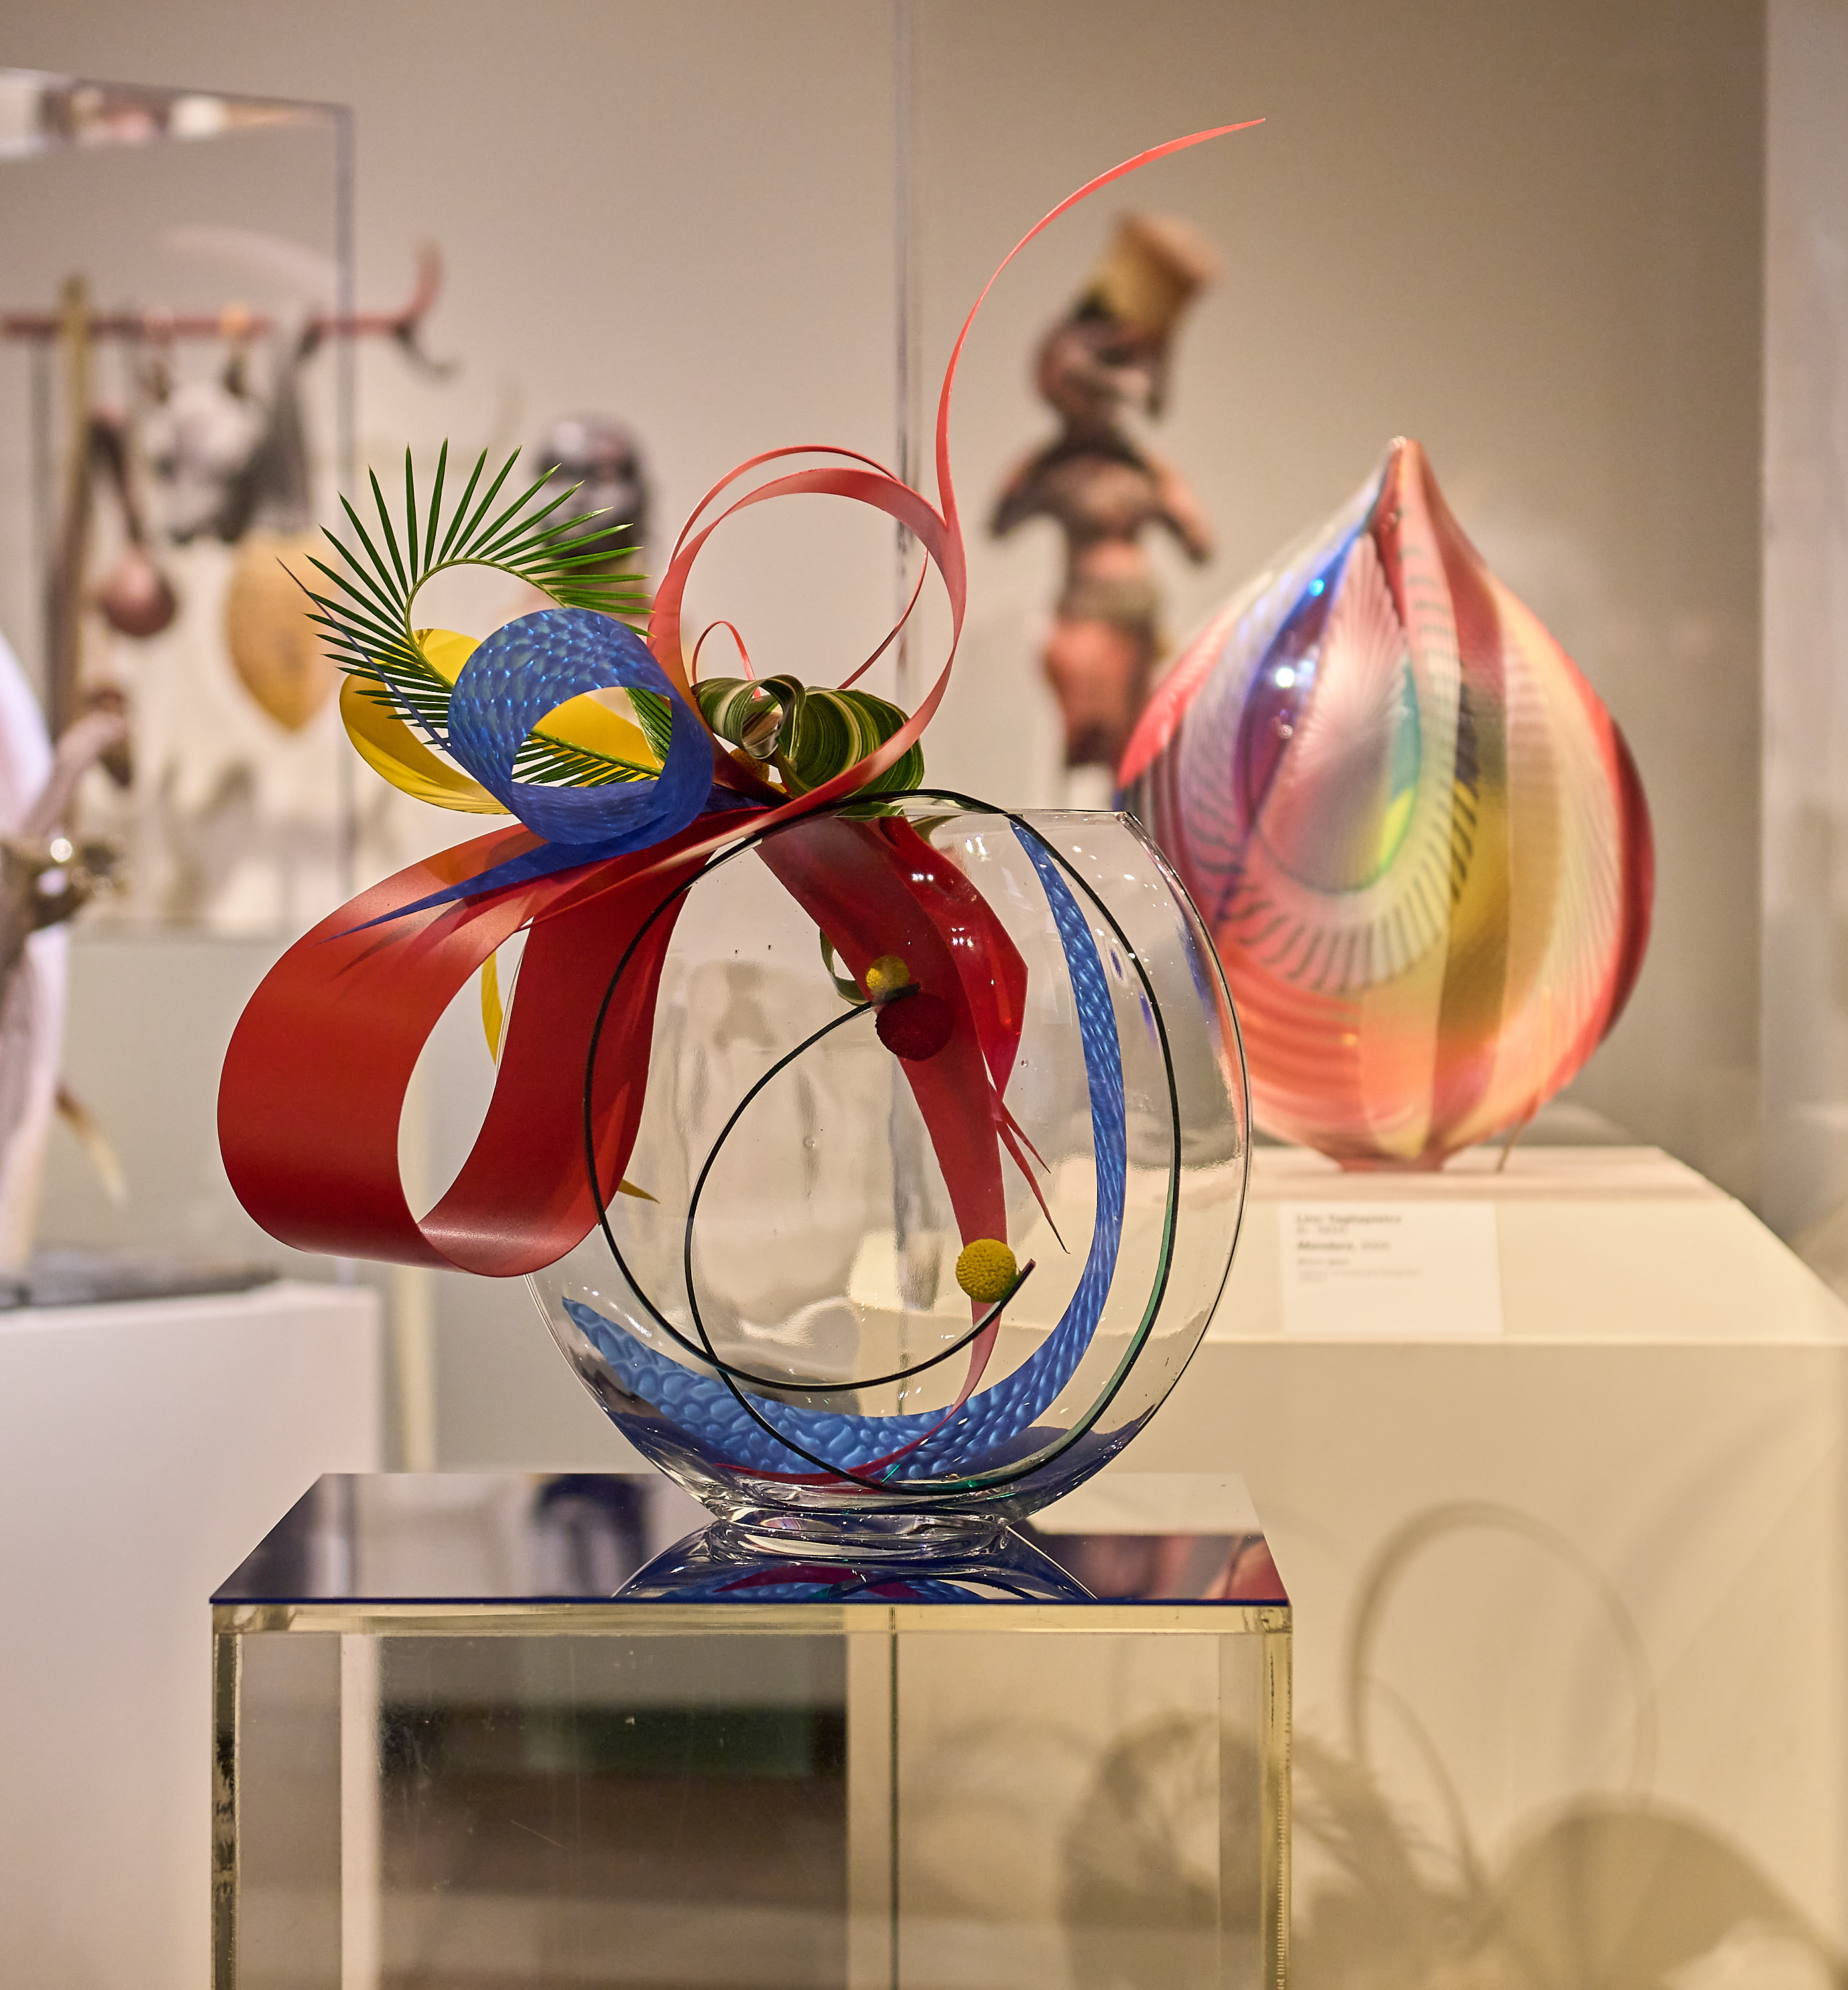 A glass vase with intricate designs, featuring red, blue, and yellow decorations, sits on a pedestal, with colorful abstract art pieces displayed in the background.